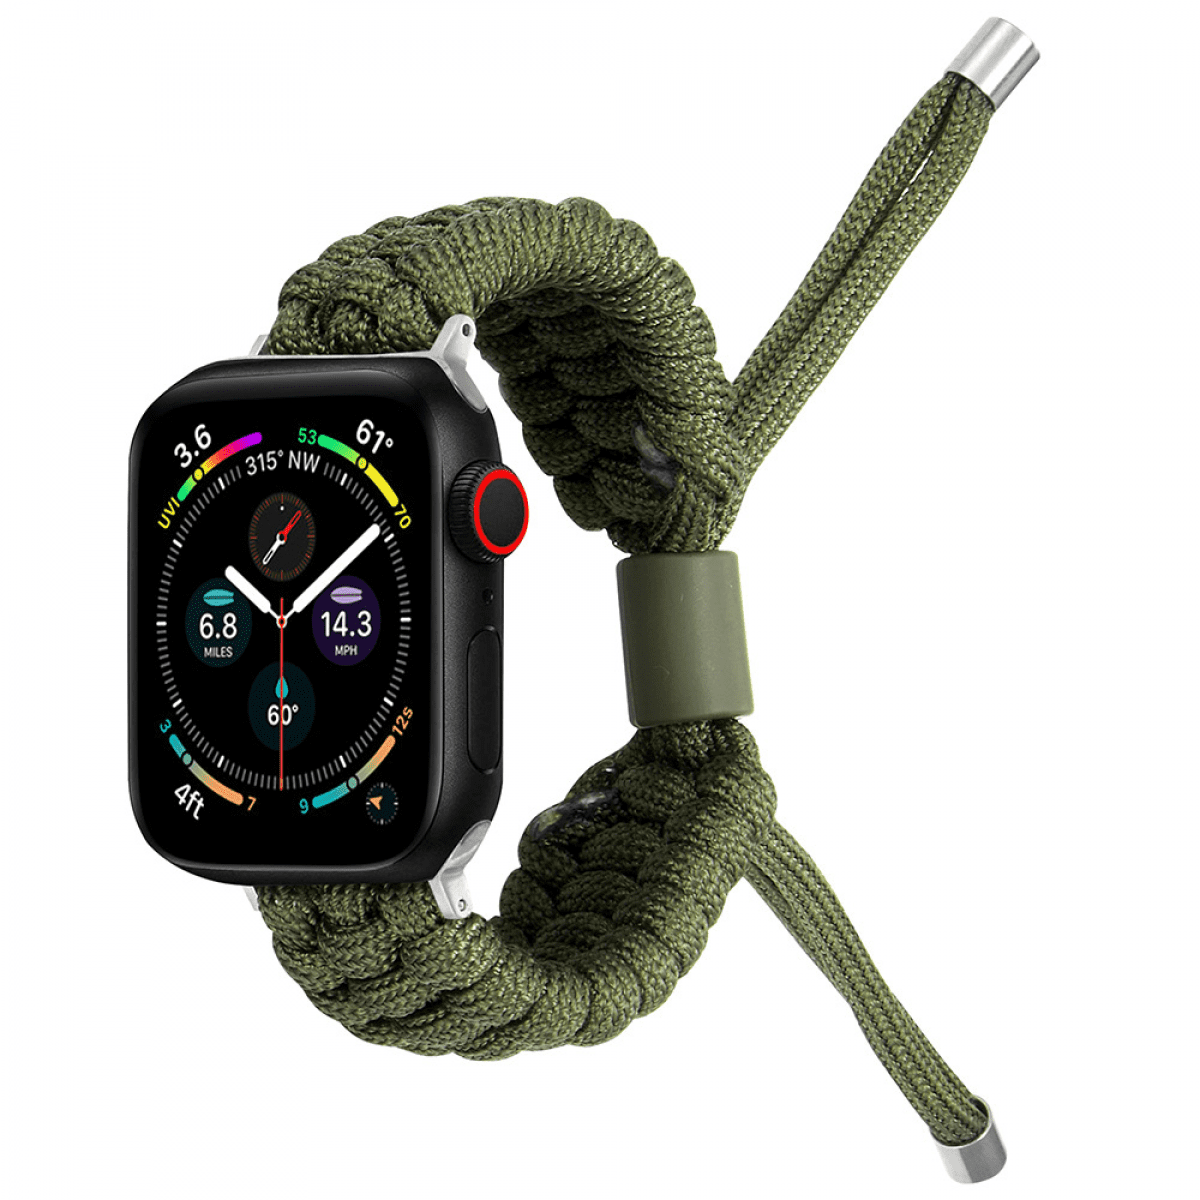 JUSTUP Paracord Watch Band Adjustable Woven Strap for Apple Watch